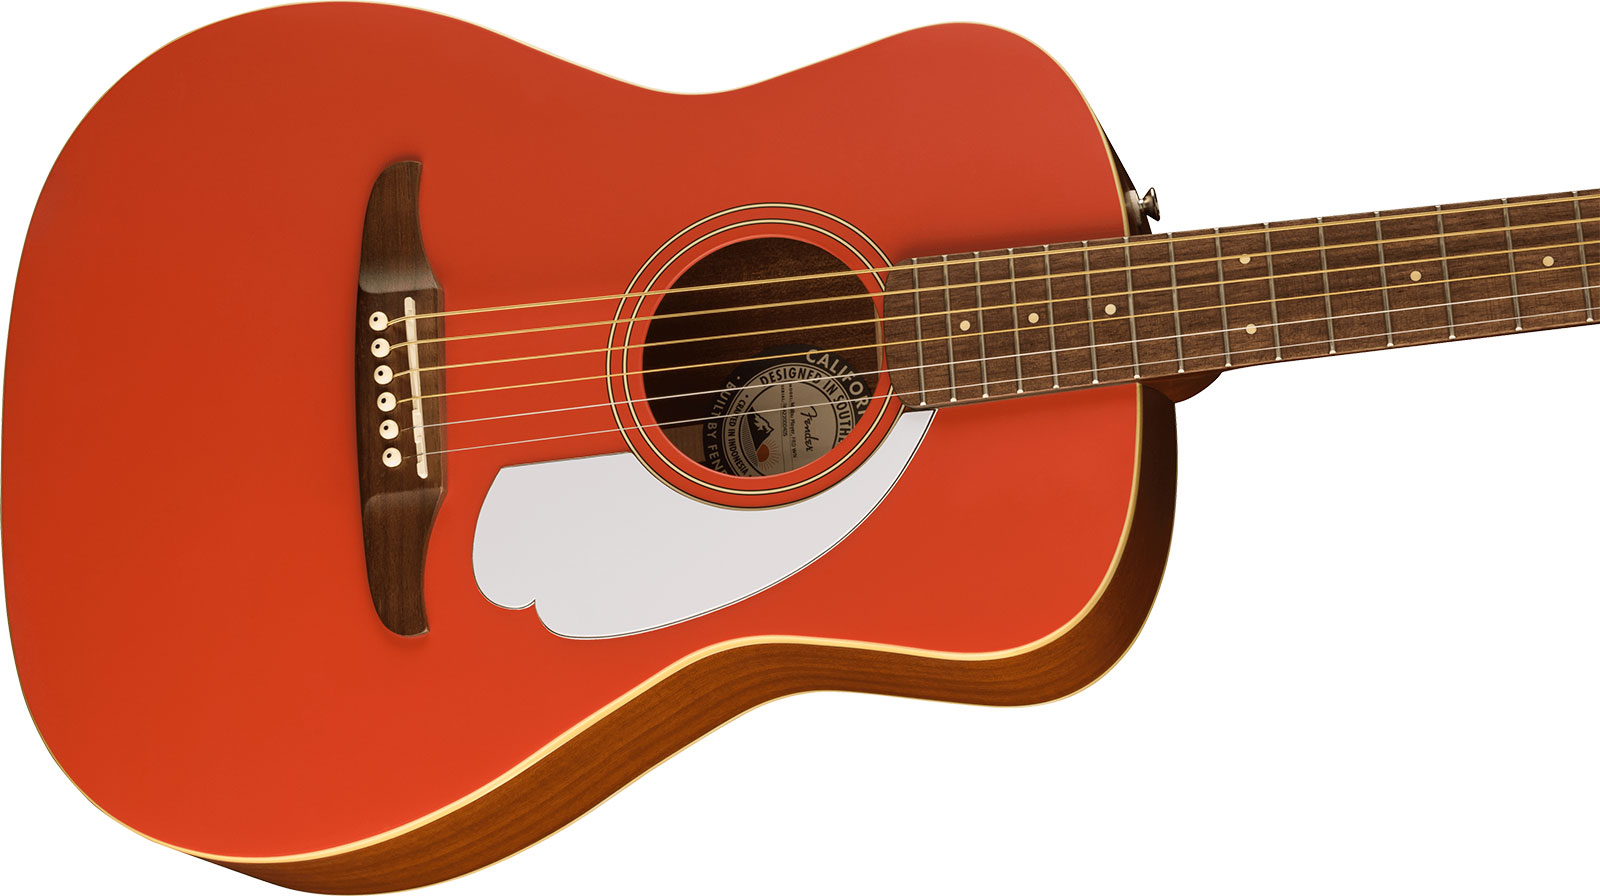 Fender Malibu Player 2023 Parlor Epicea Sapele Wal - Fiesta Red - Electro acoustic guitar - Variation 2